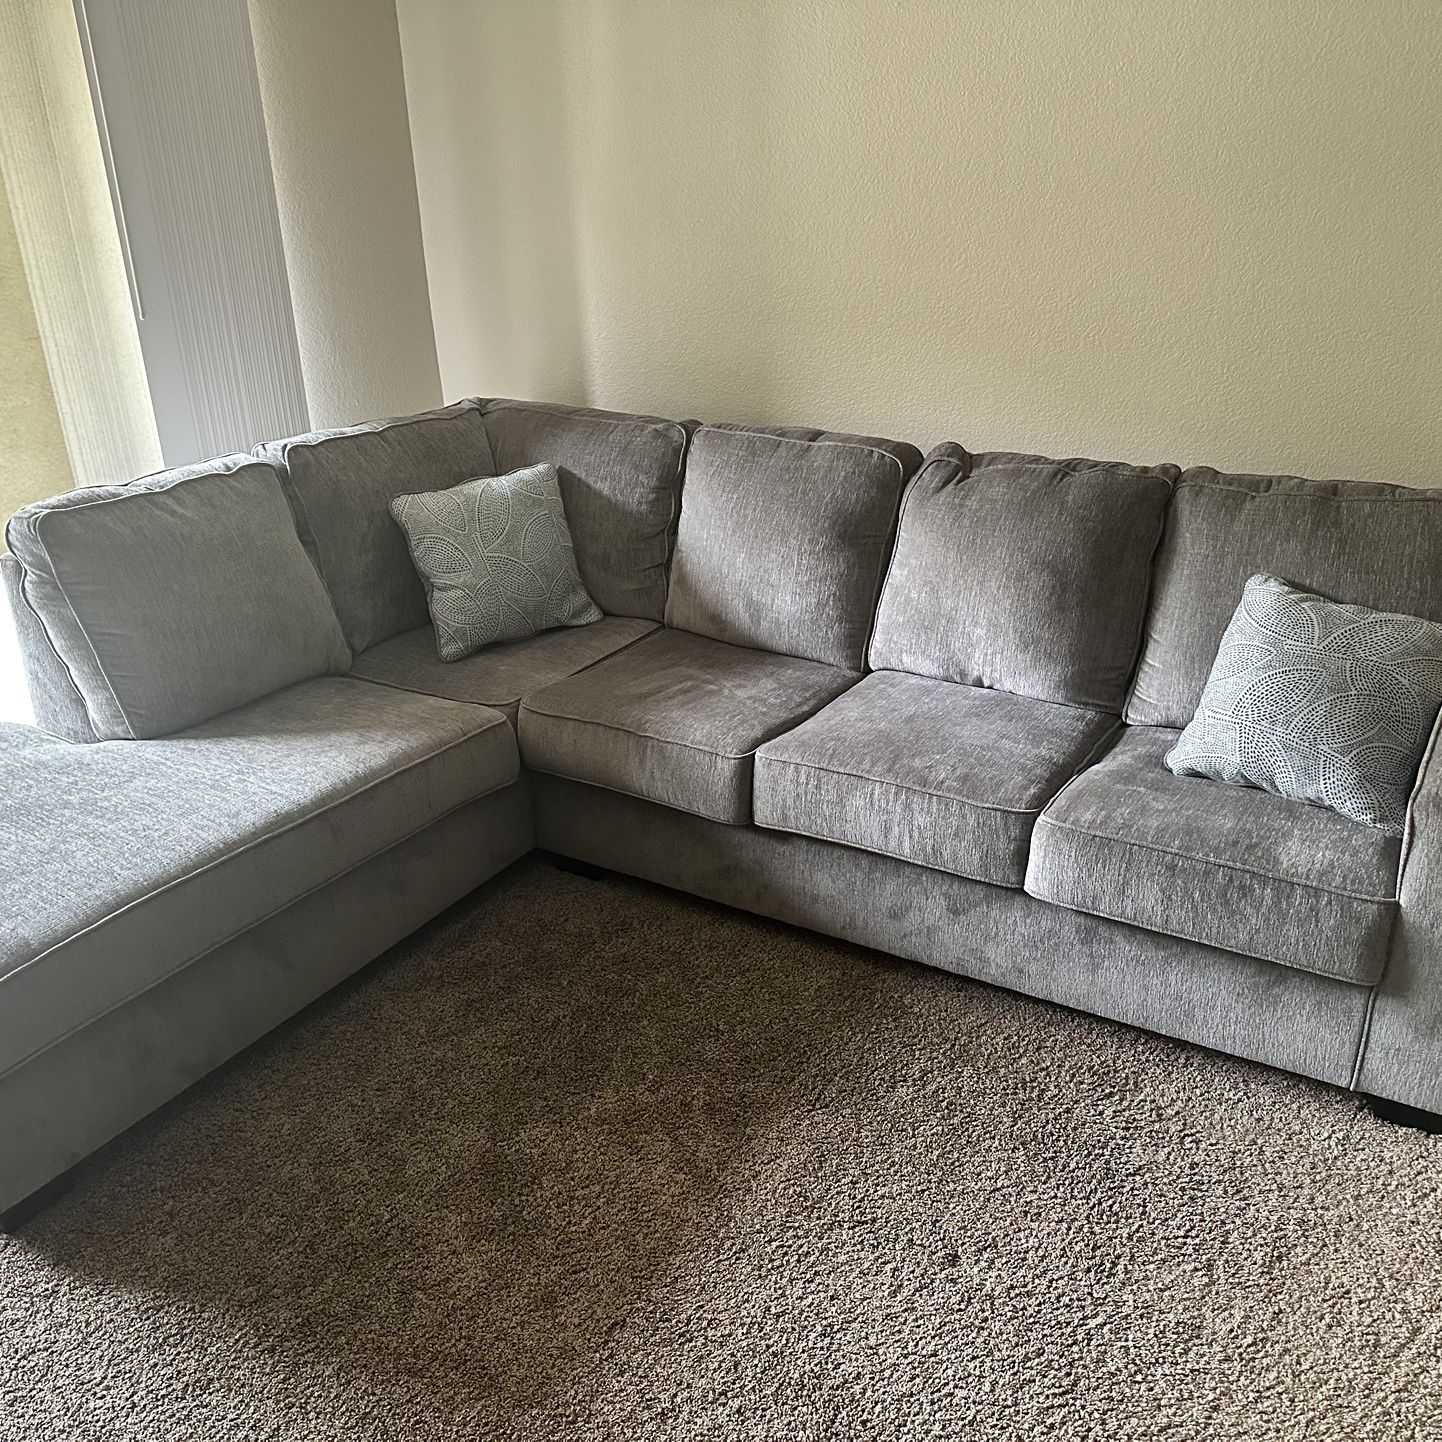 NEW Ashley Furniture! Must Sell!$600